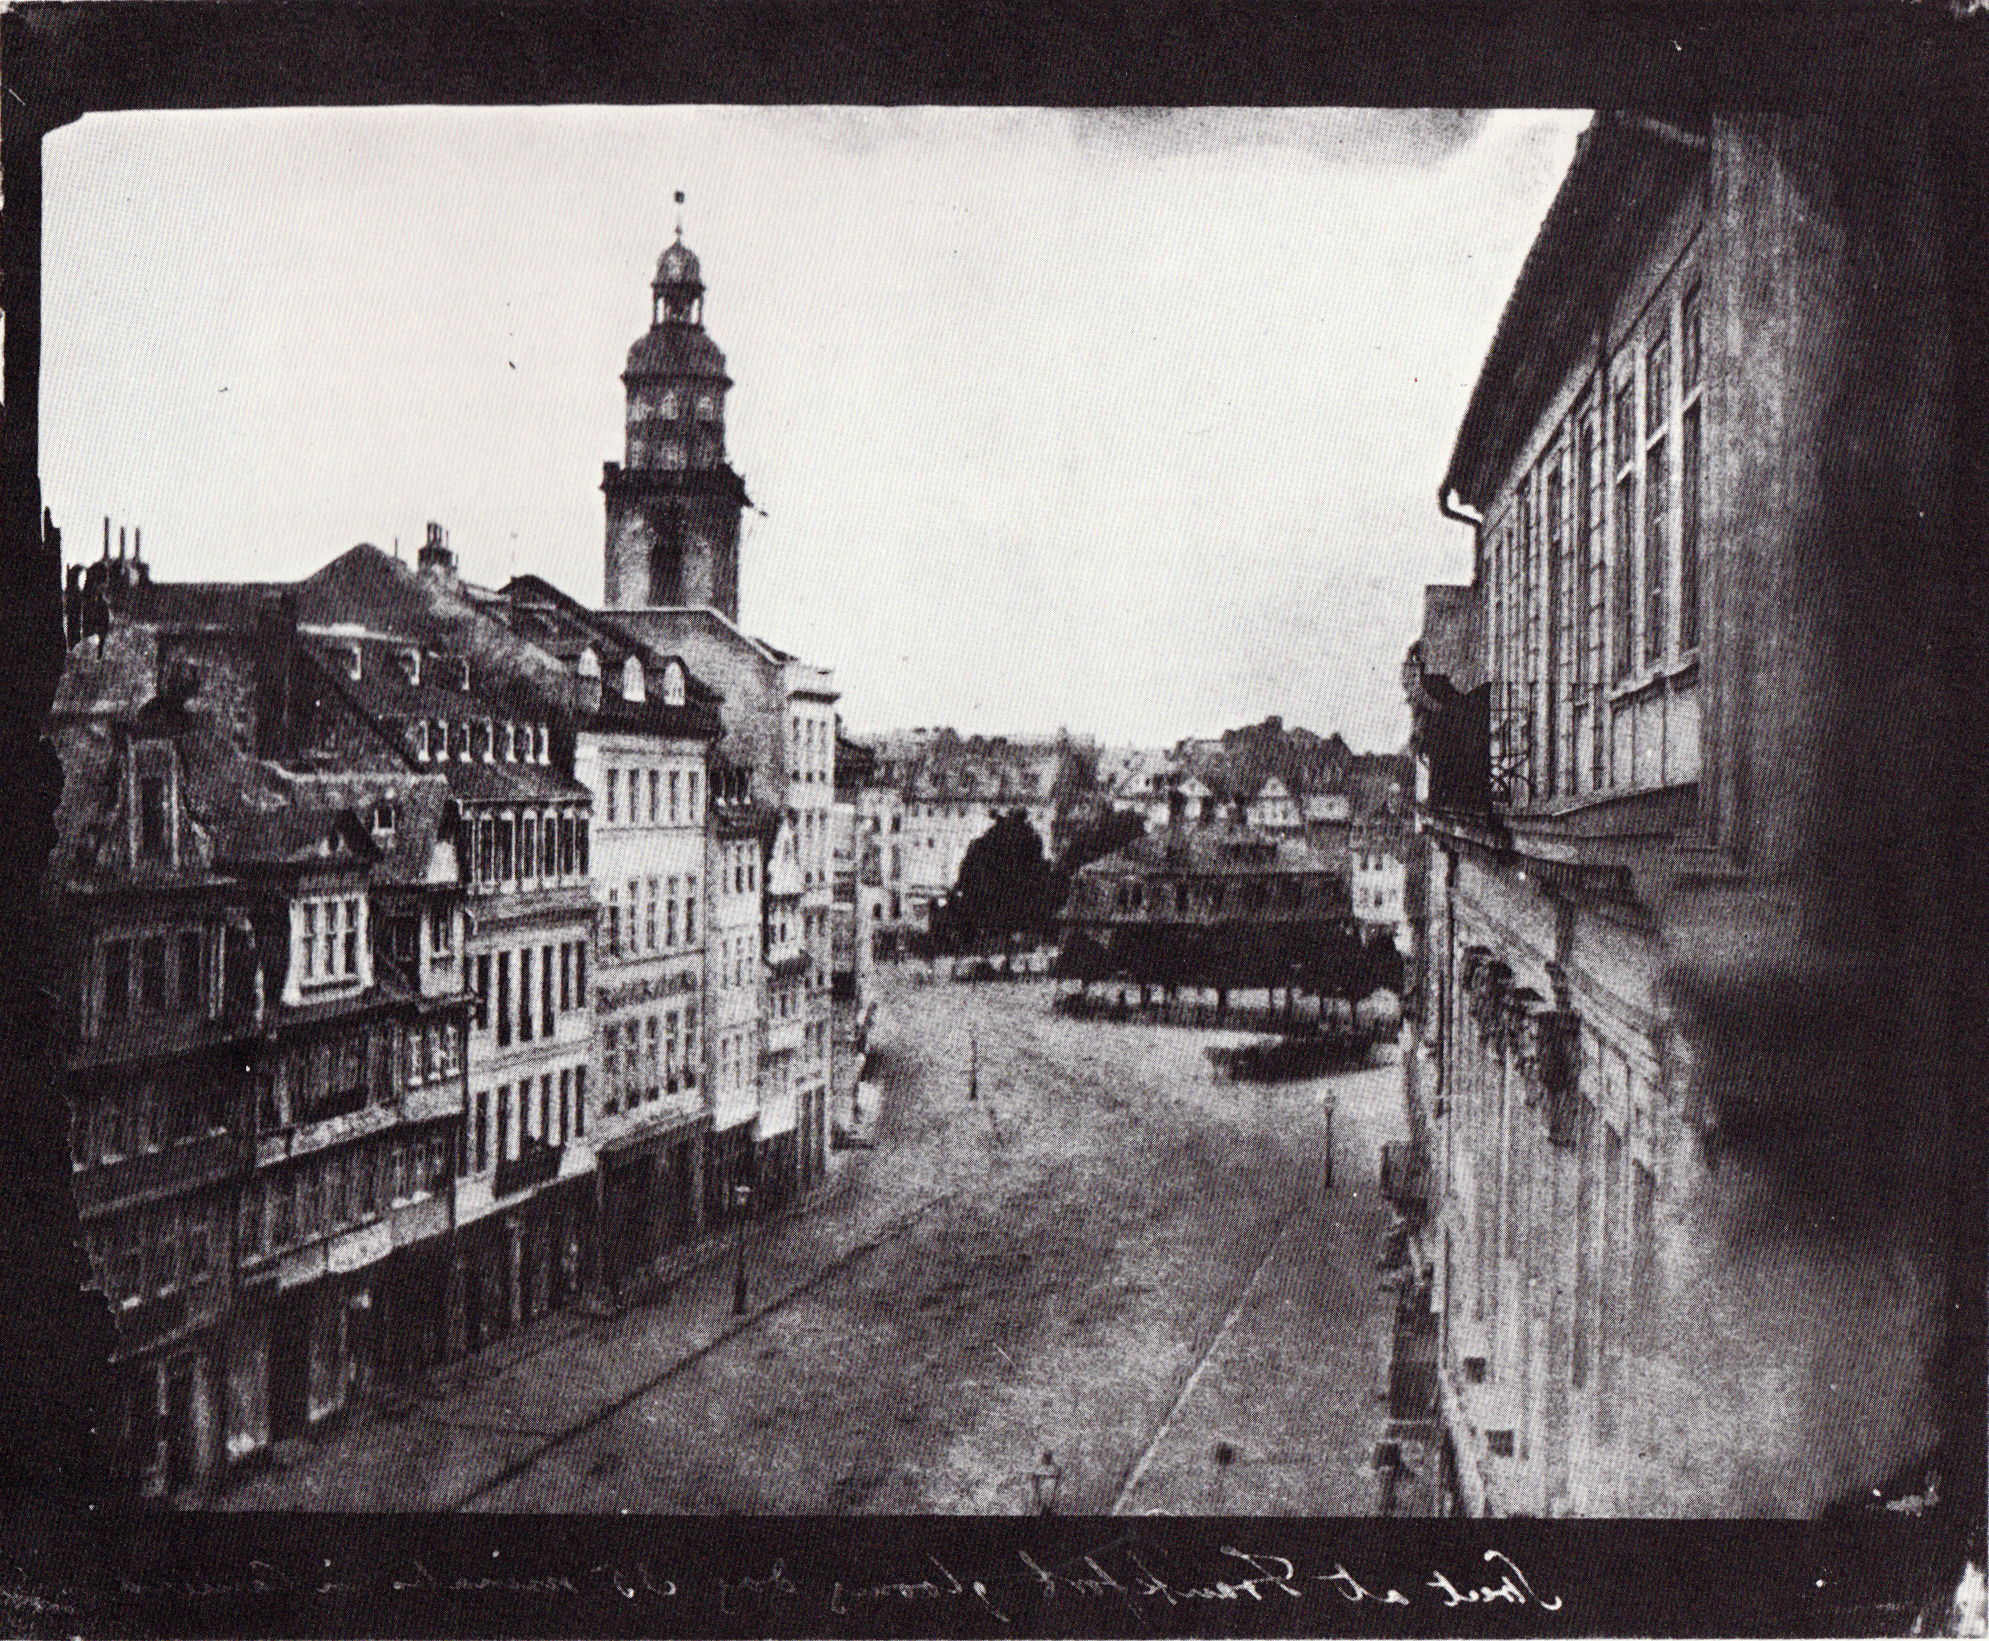 View from a Window of the Hotel "Russischer Hof" by Henry Fox Talbot - 1846 coleção privada